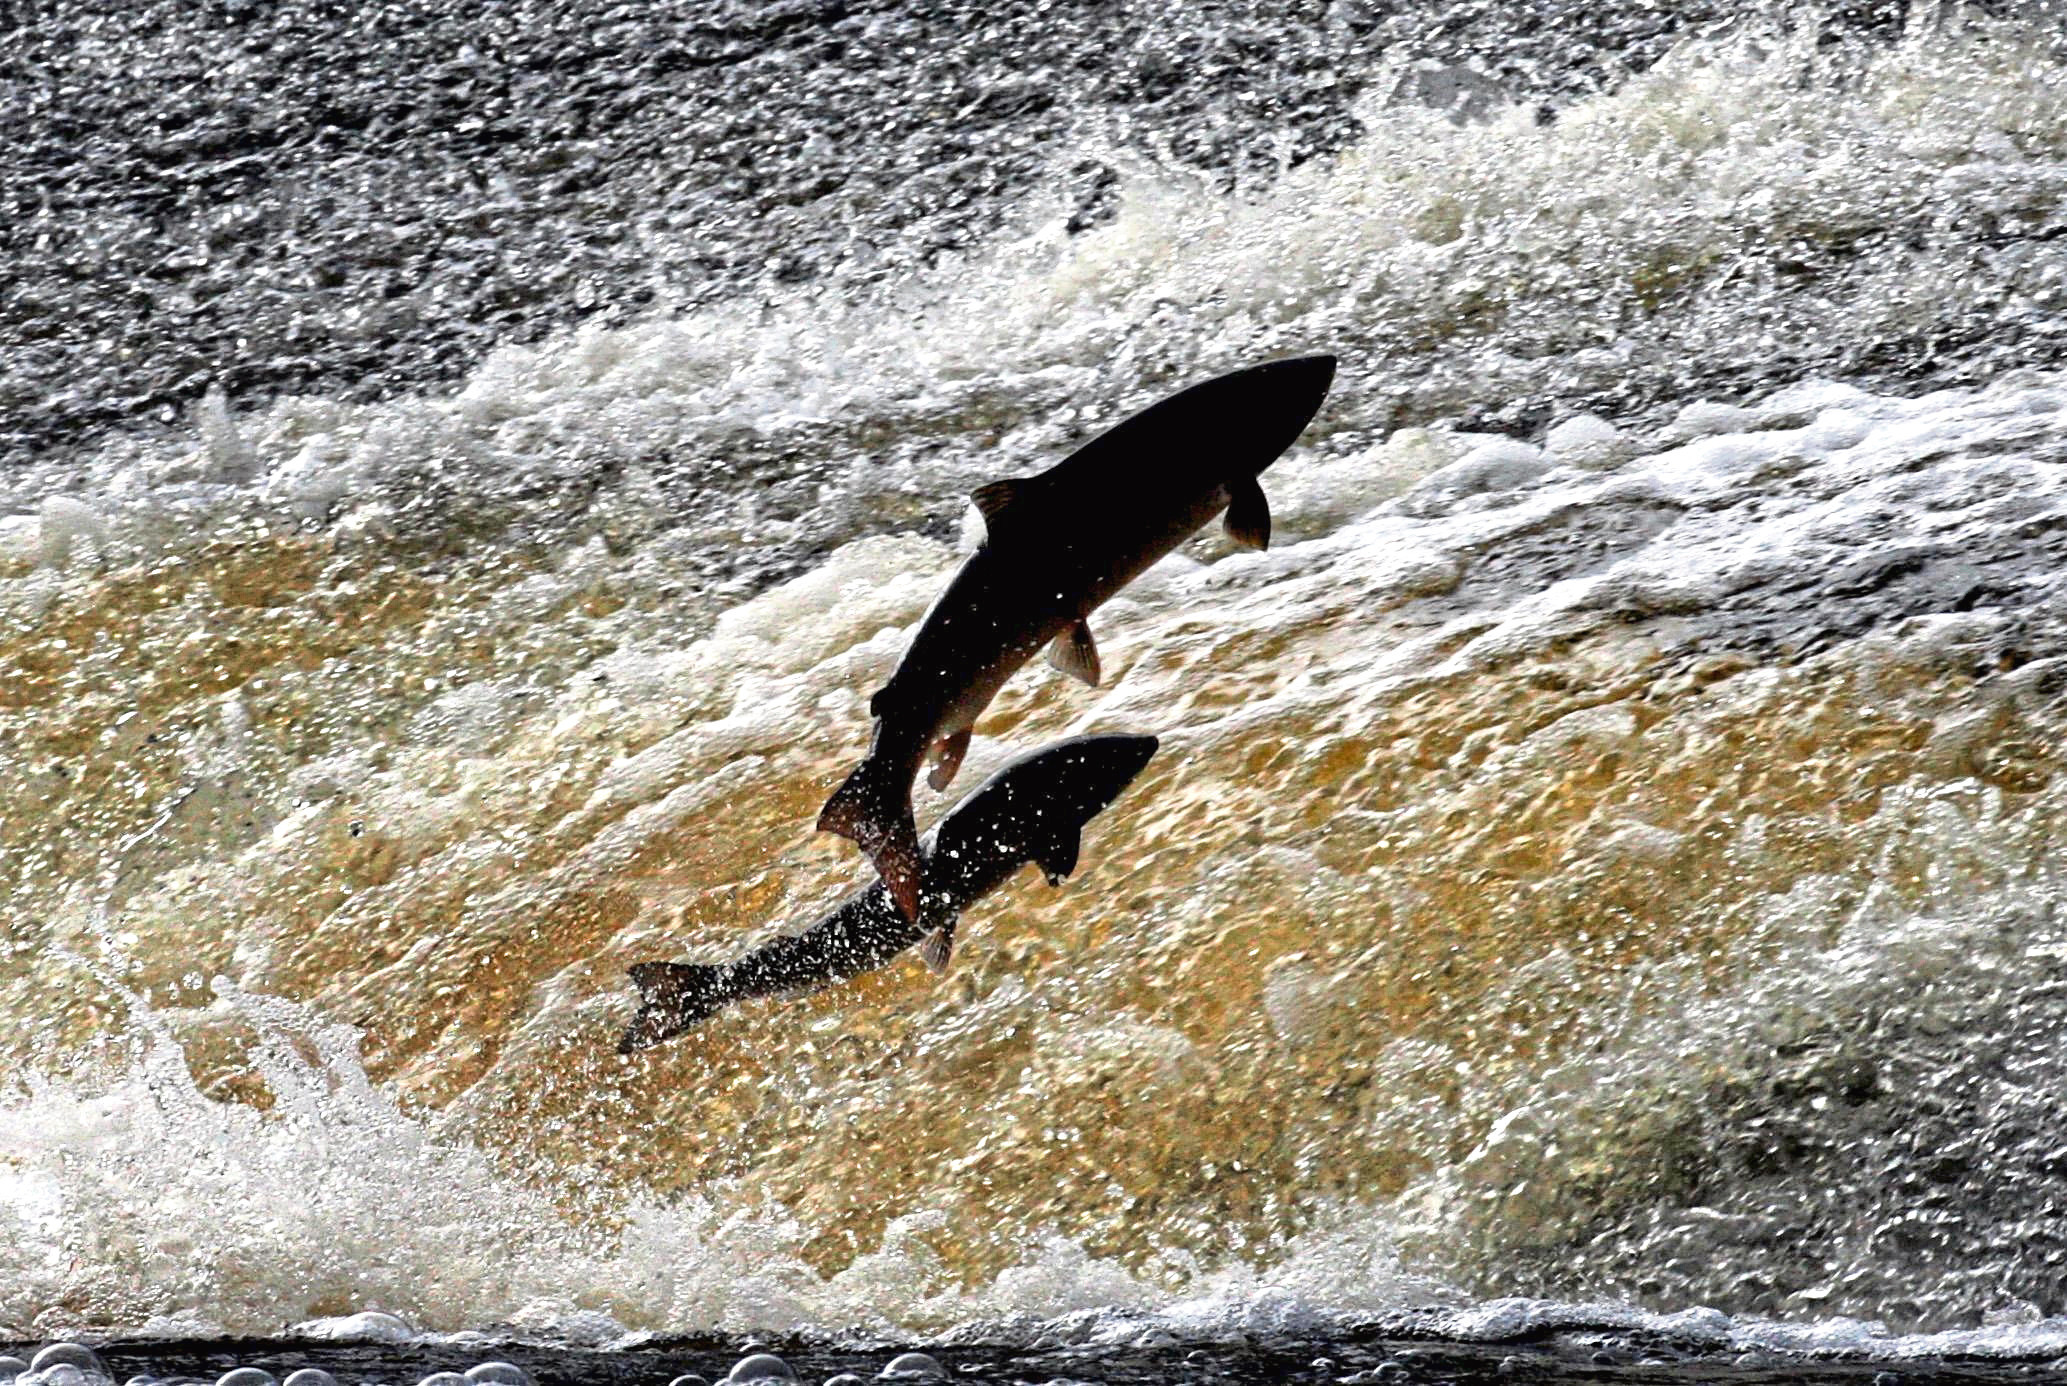 Atlantic Salmon and Sea Trout try to make their way up stream by jumping the Could on the Ettrick river near Selkirk in the Scottish Borders.